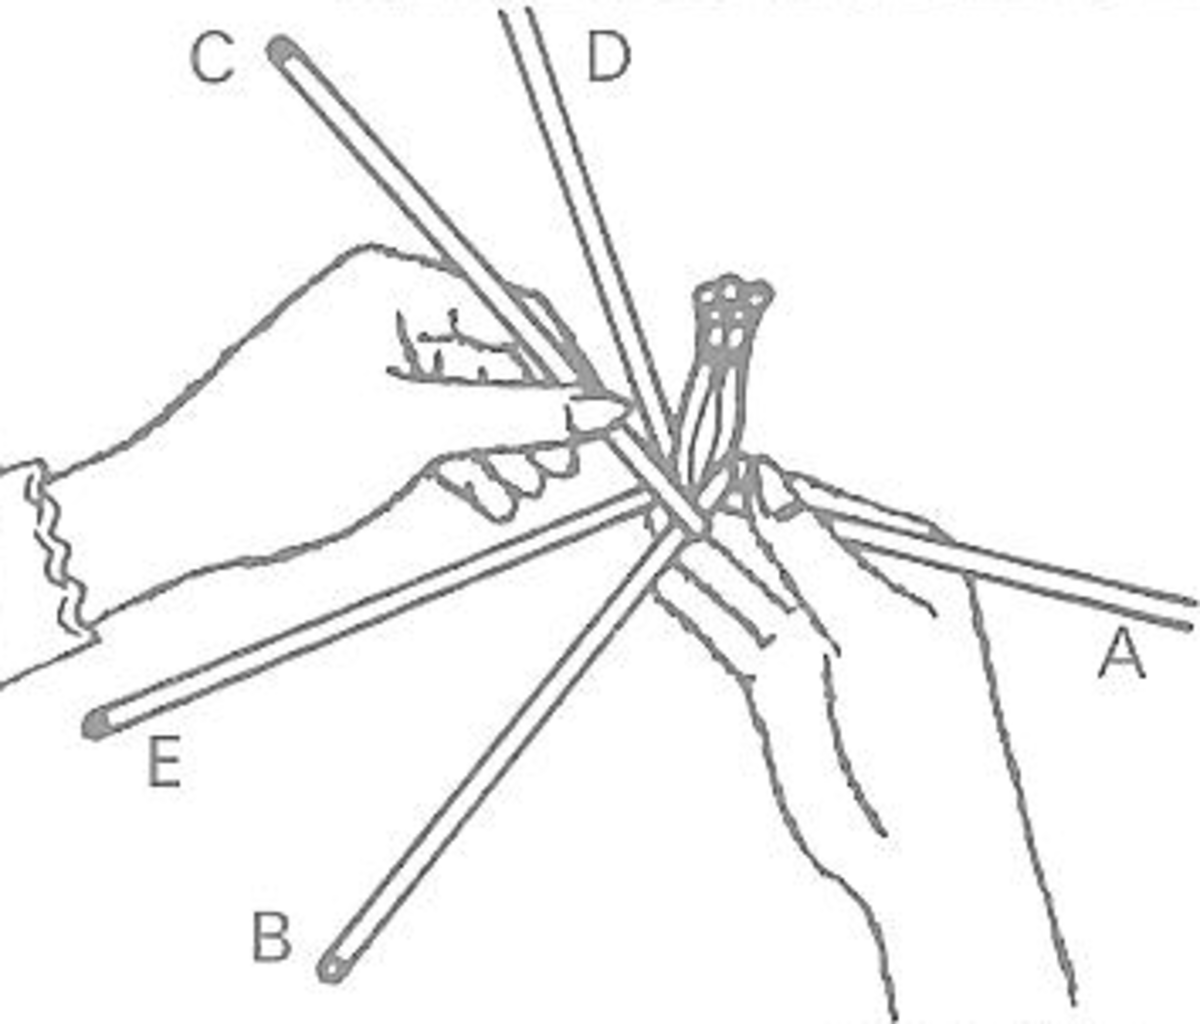 Figure 3: Weaving Round a Former - Third Stage